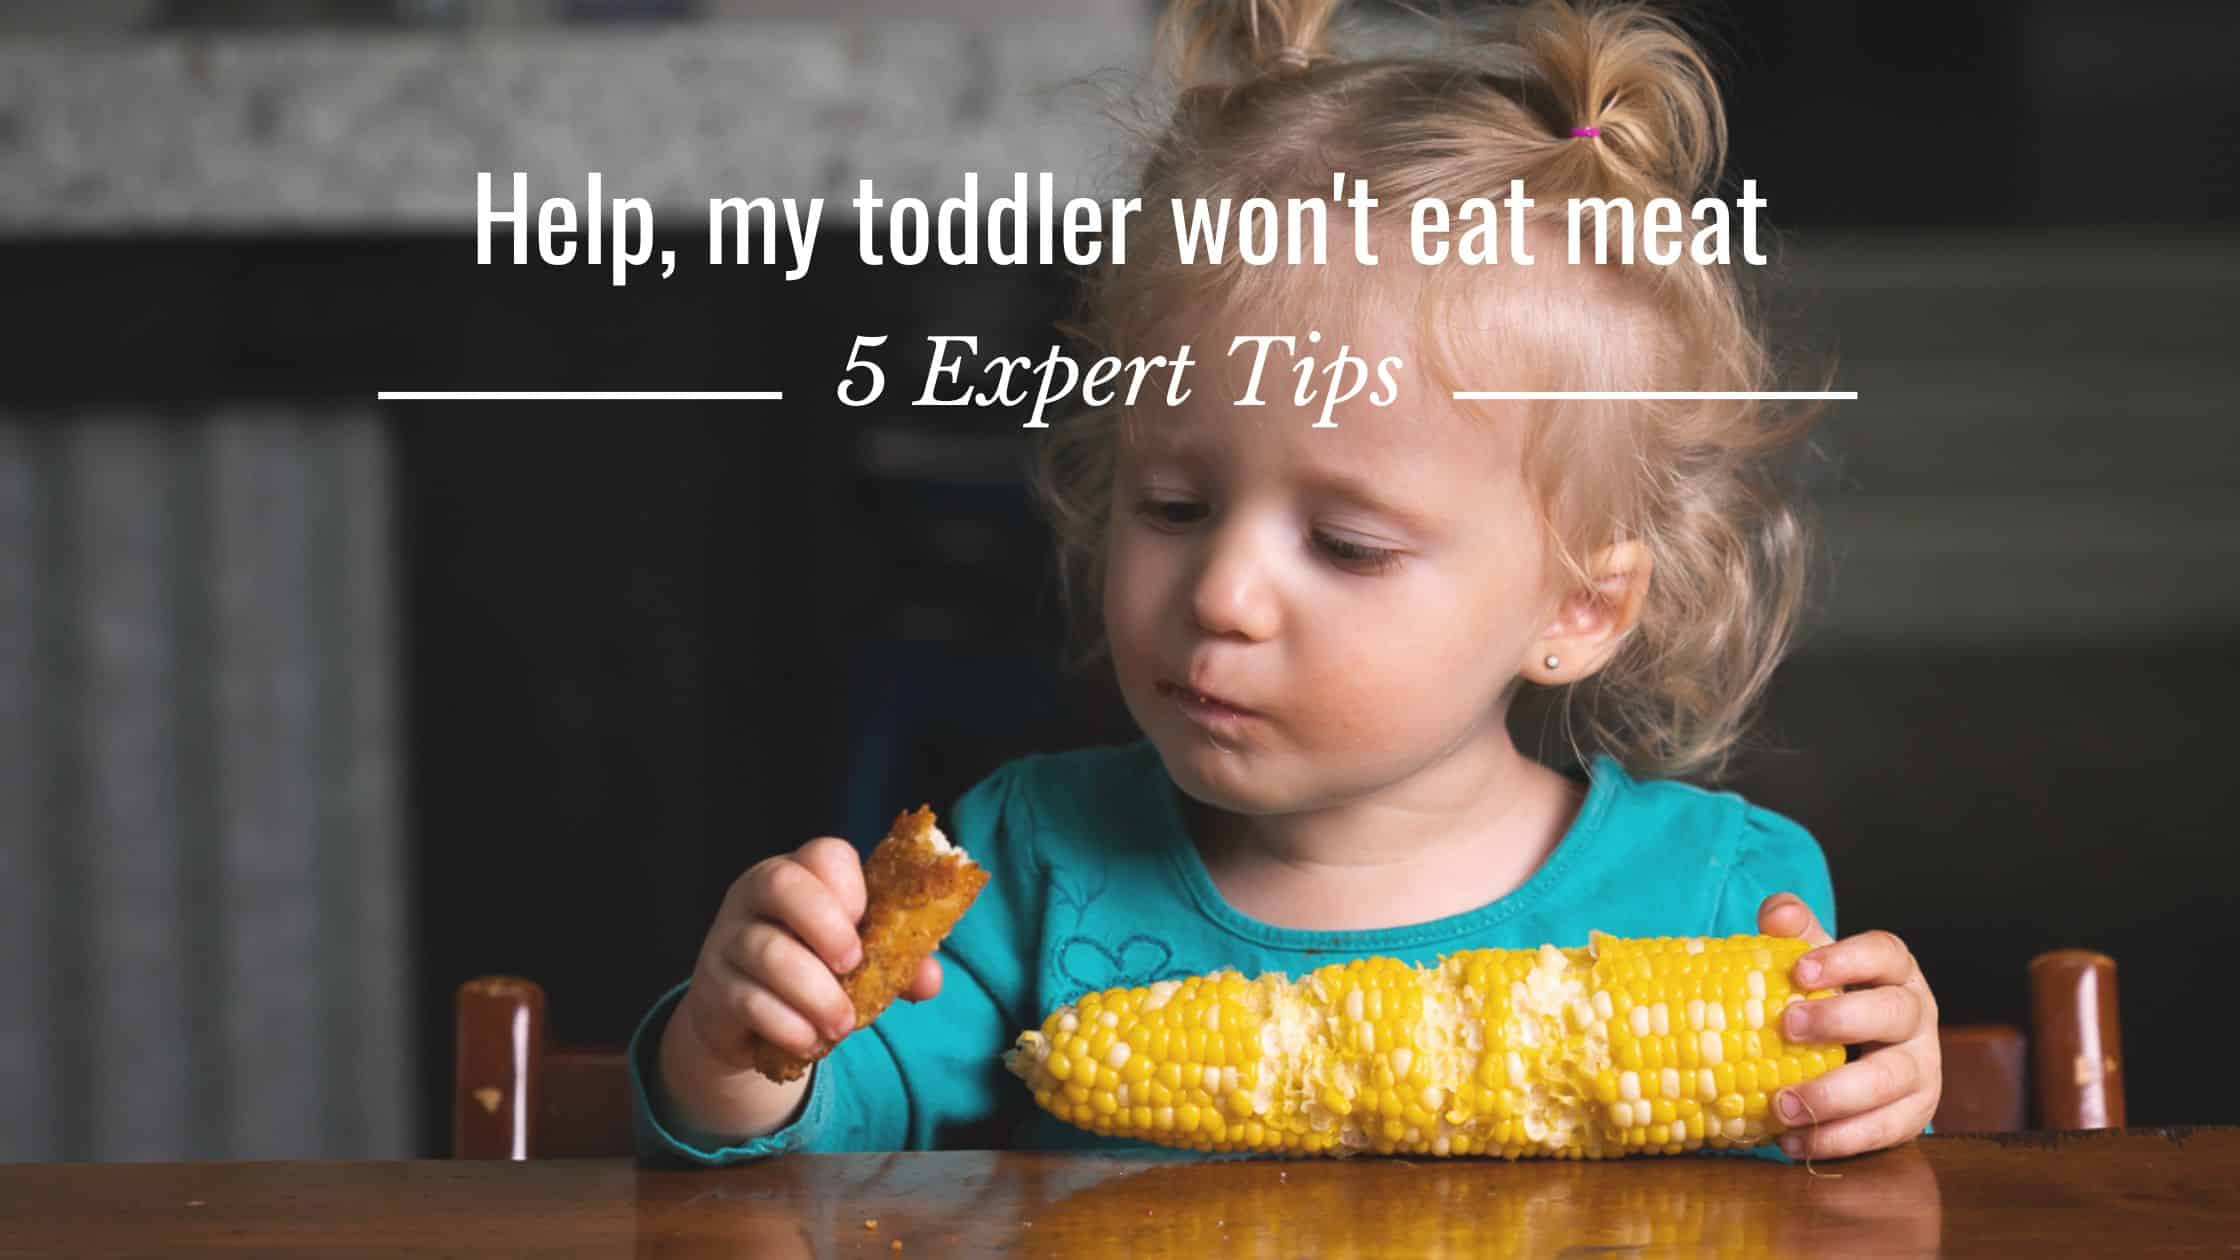 Toddler won't eat meat - child looking at a chicken nugget